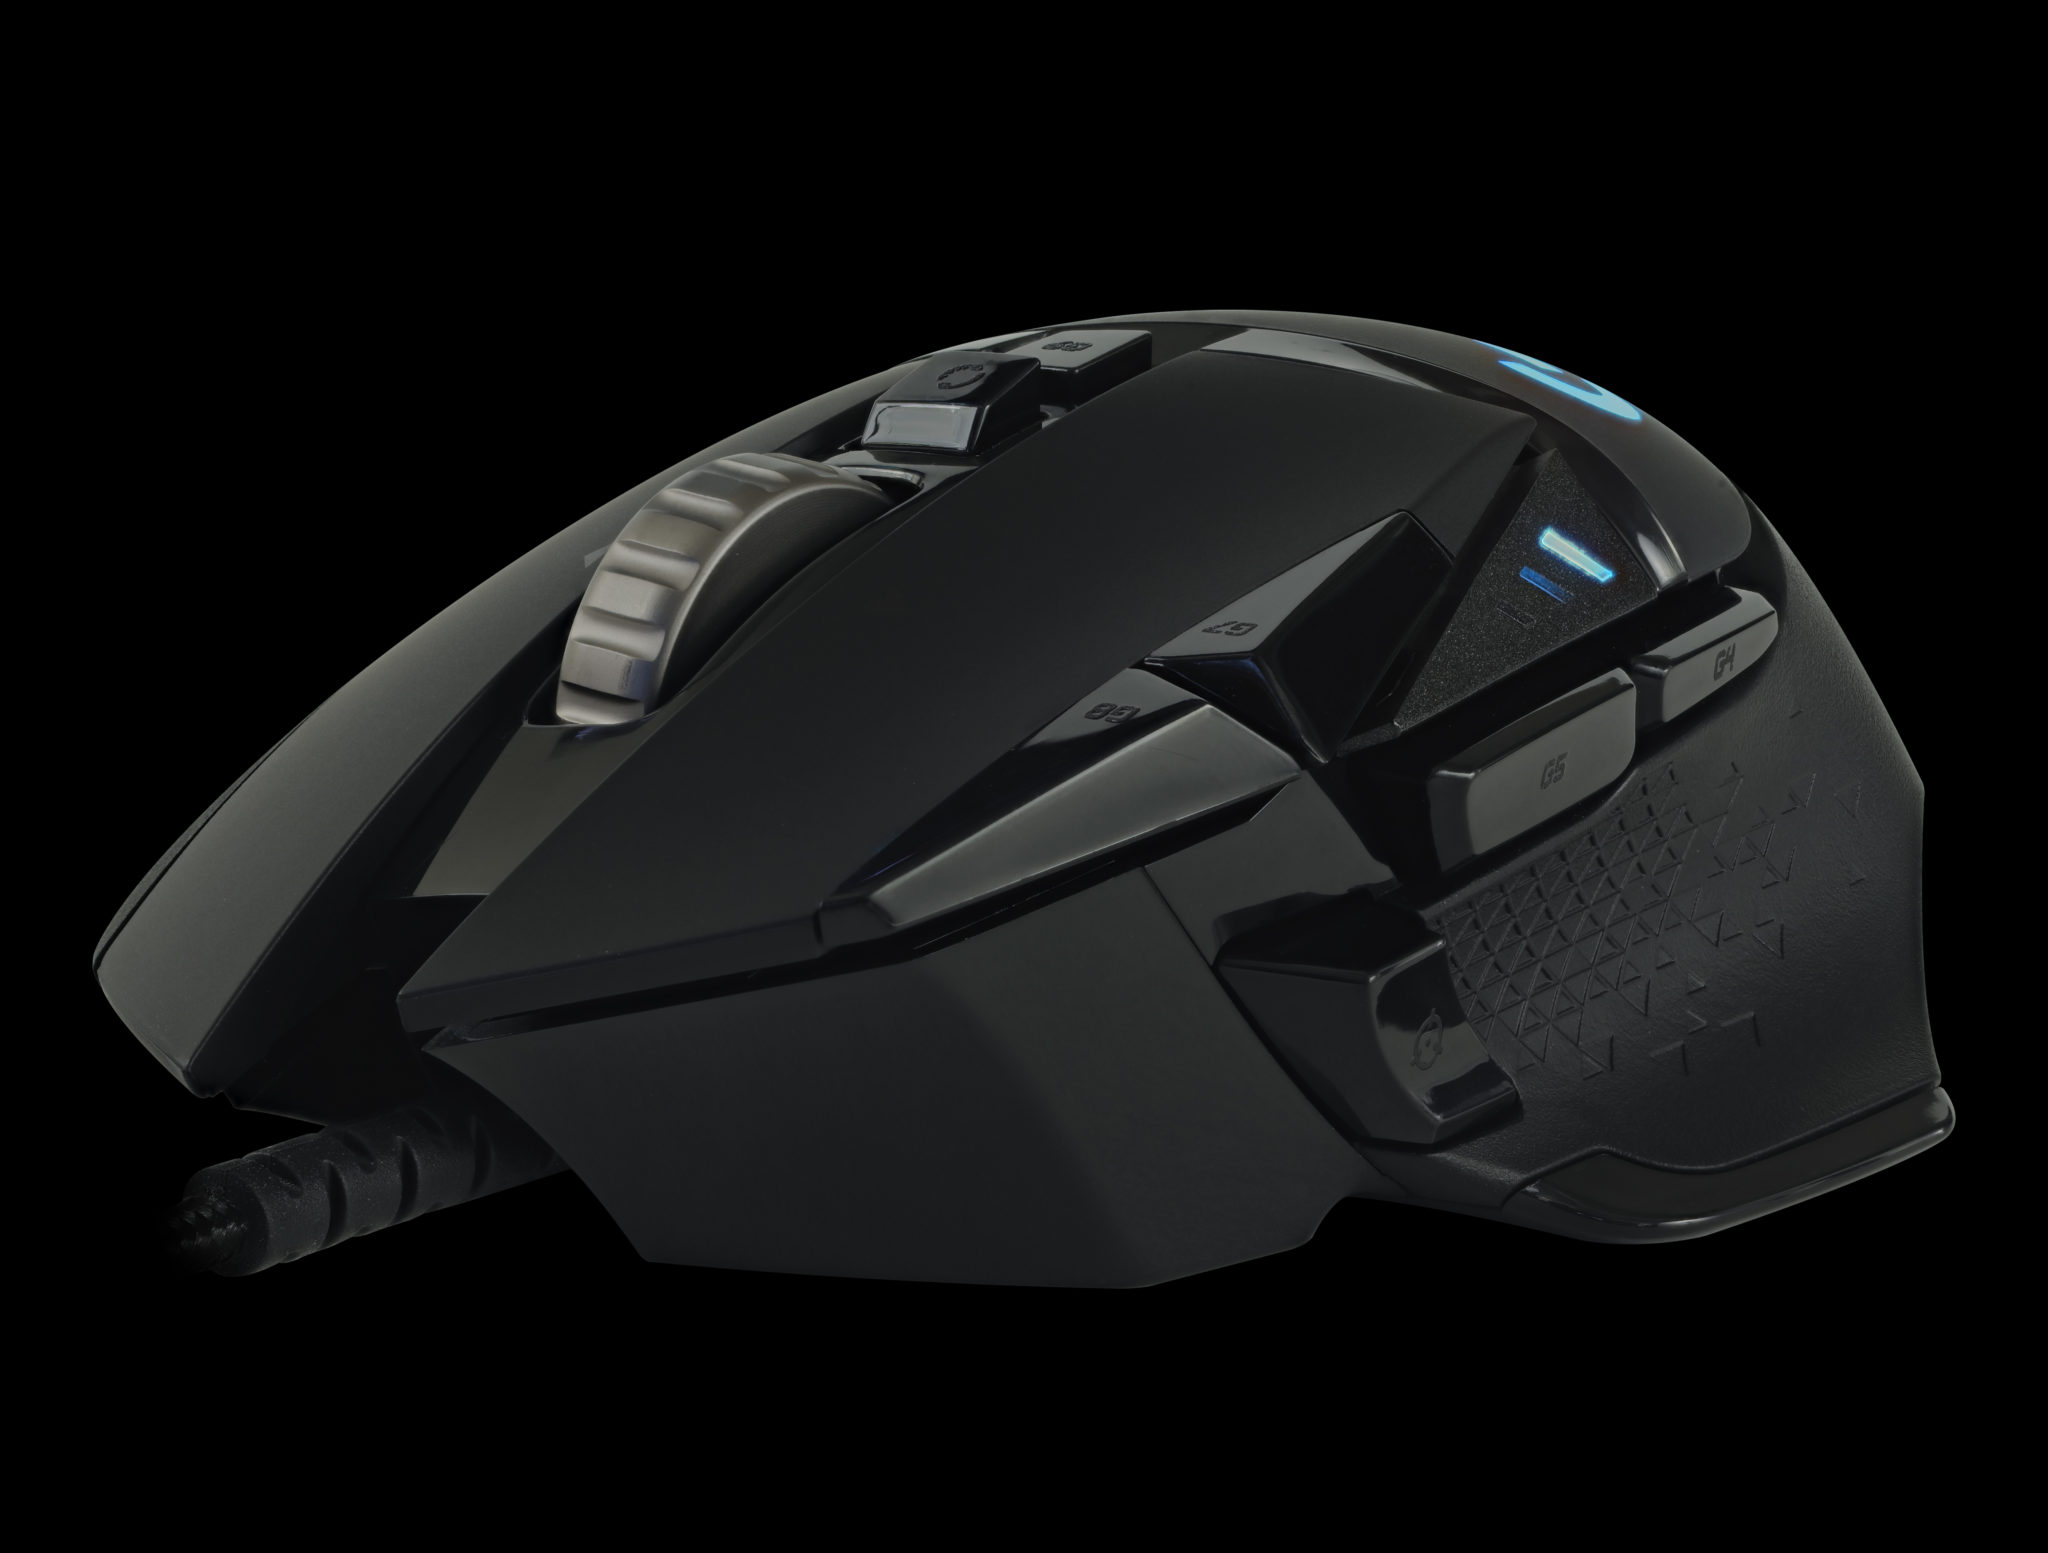 Logitech G502 HERO High Performance Gaming Mouse Review